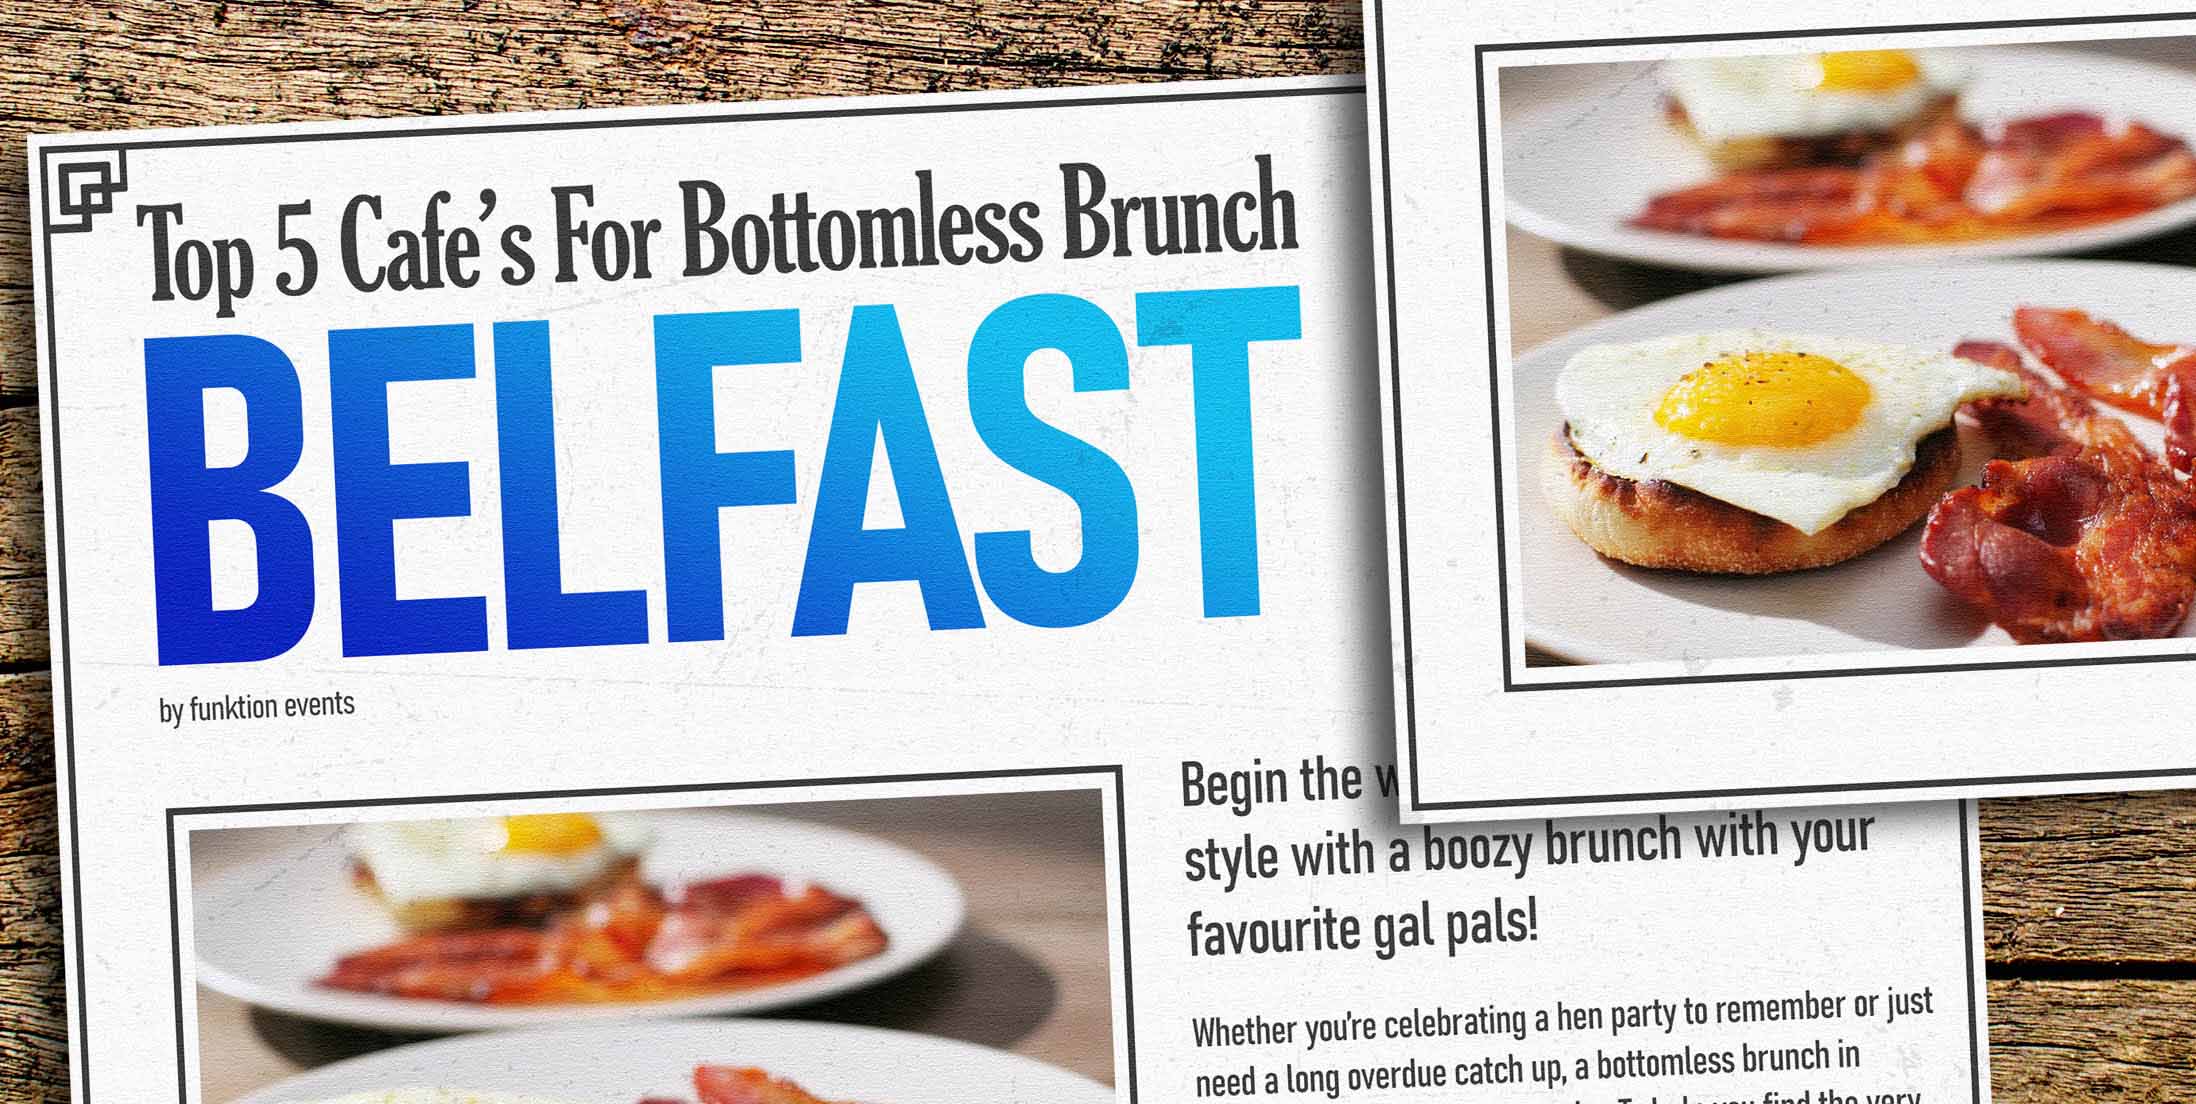 The Top 5 Cafe's for Bottomless Brunch in Belfast